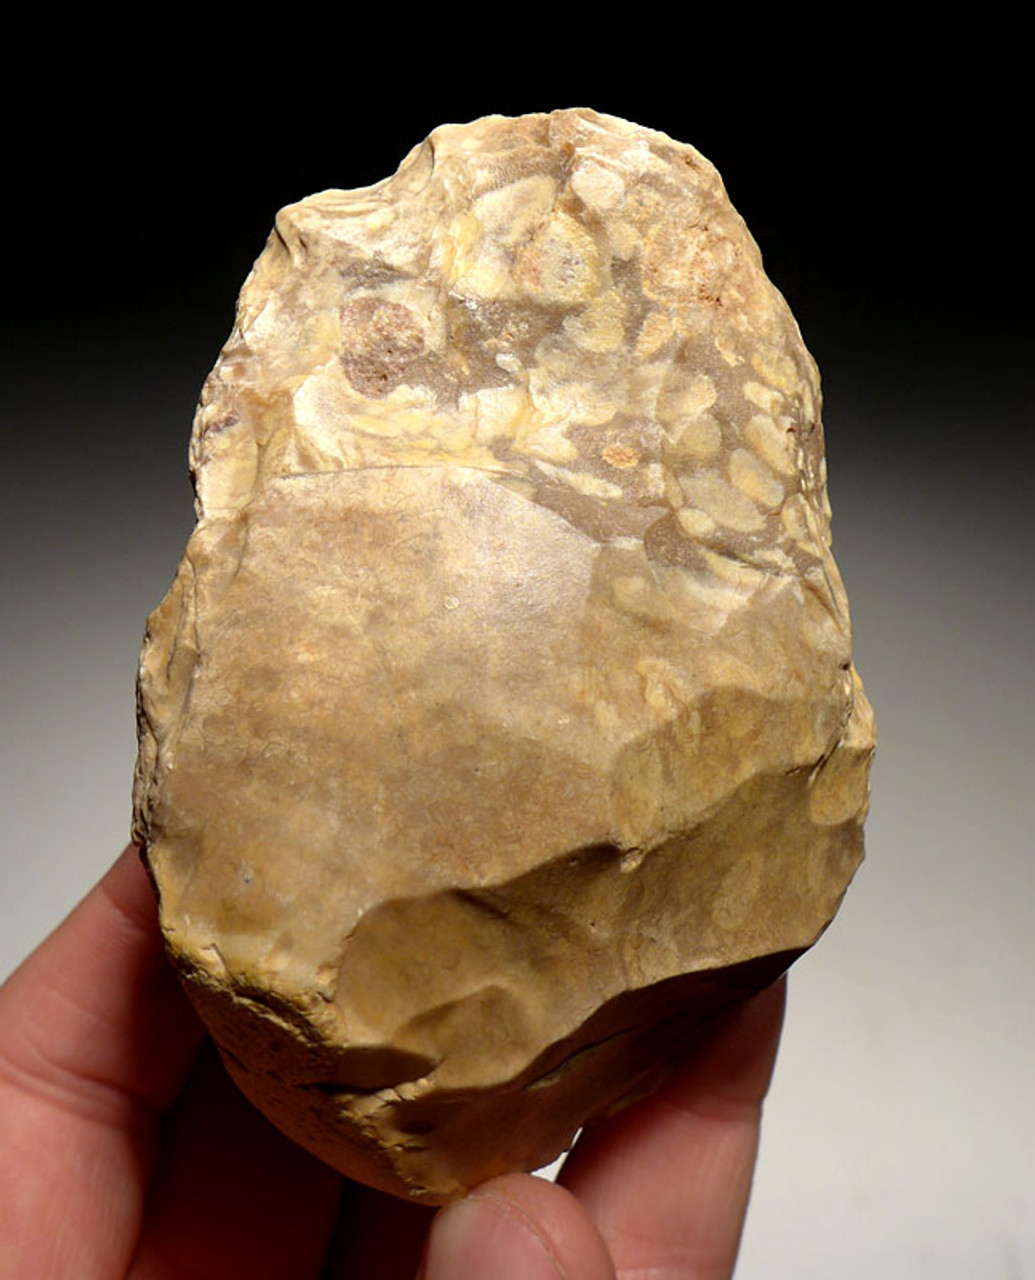 M362 - RARE MOUSTERIAN CLEAVER HAND AXE FROM AFRICA IN UNUSUAL PORPHYRIC FLINT